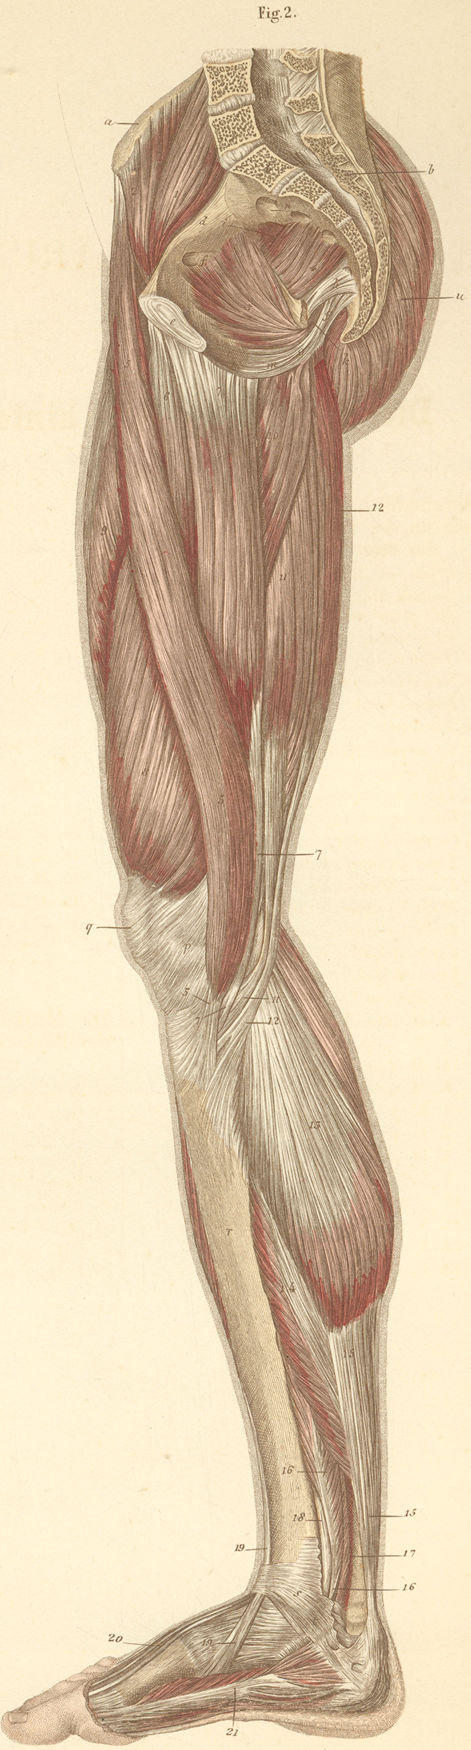 Muscles of the medial surface of the pelvis, as well as the right thigh and leg.